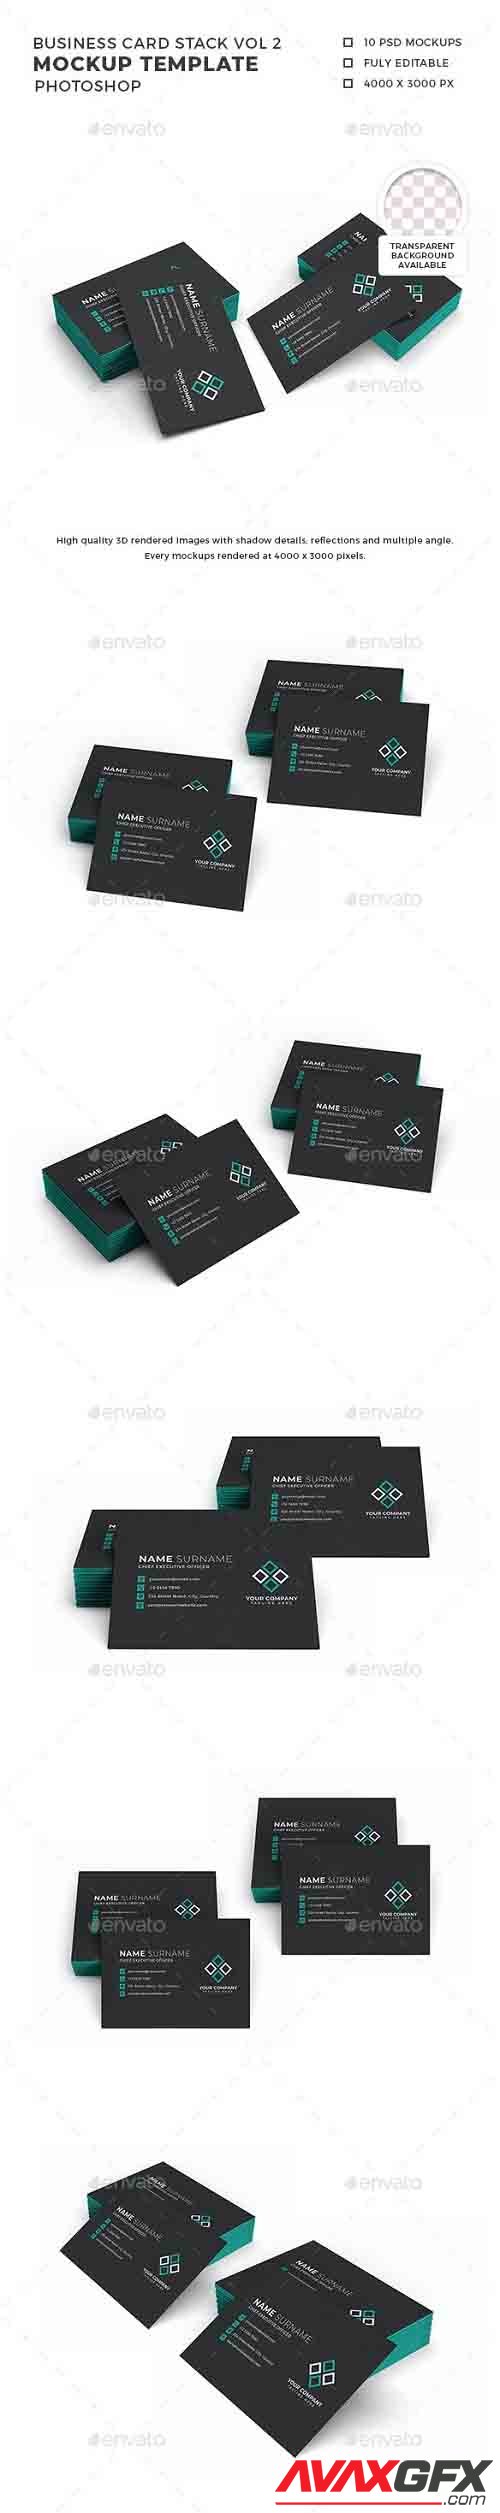 Business Card Stack Mockup Template Vol 2 - 32444758